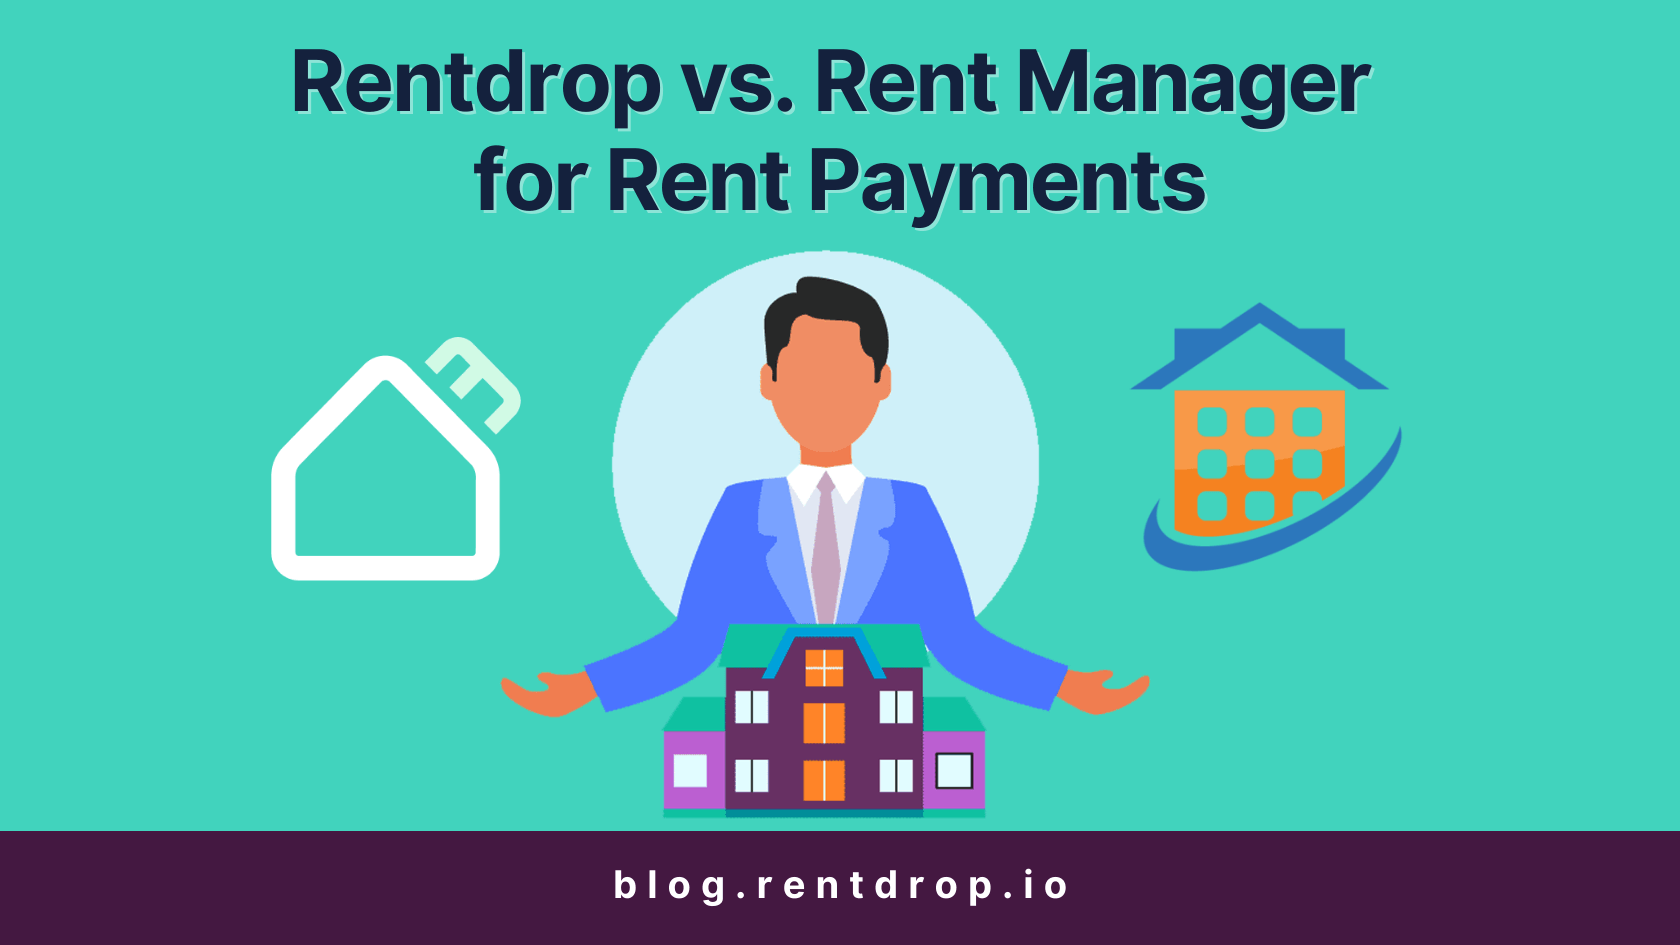 image of Rentdrop vs. Rent Manager for Rent Payments